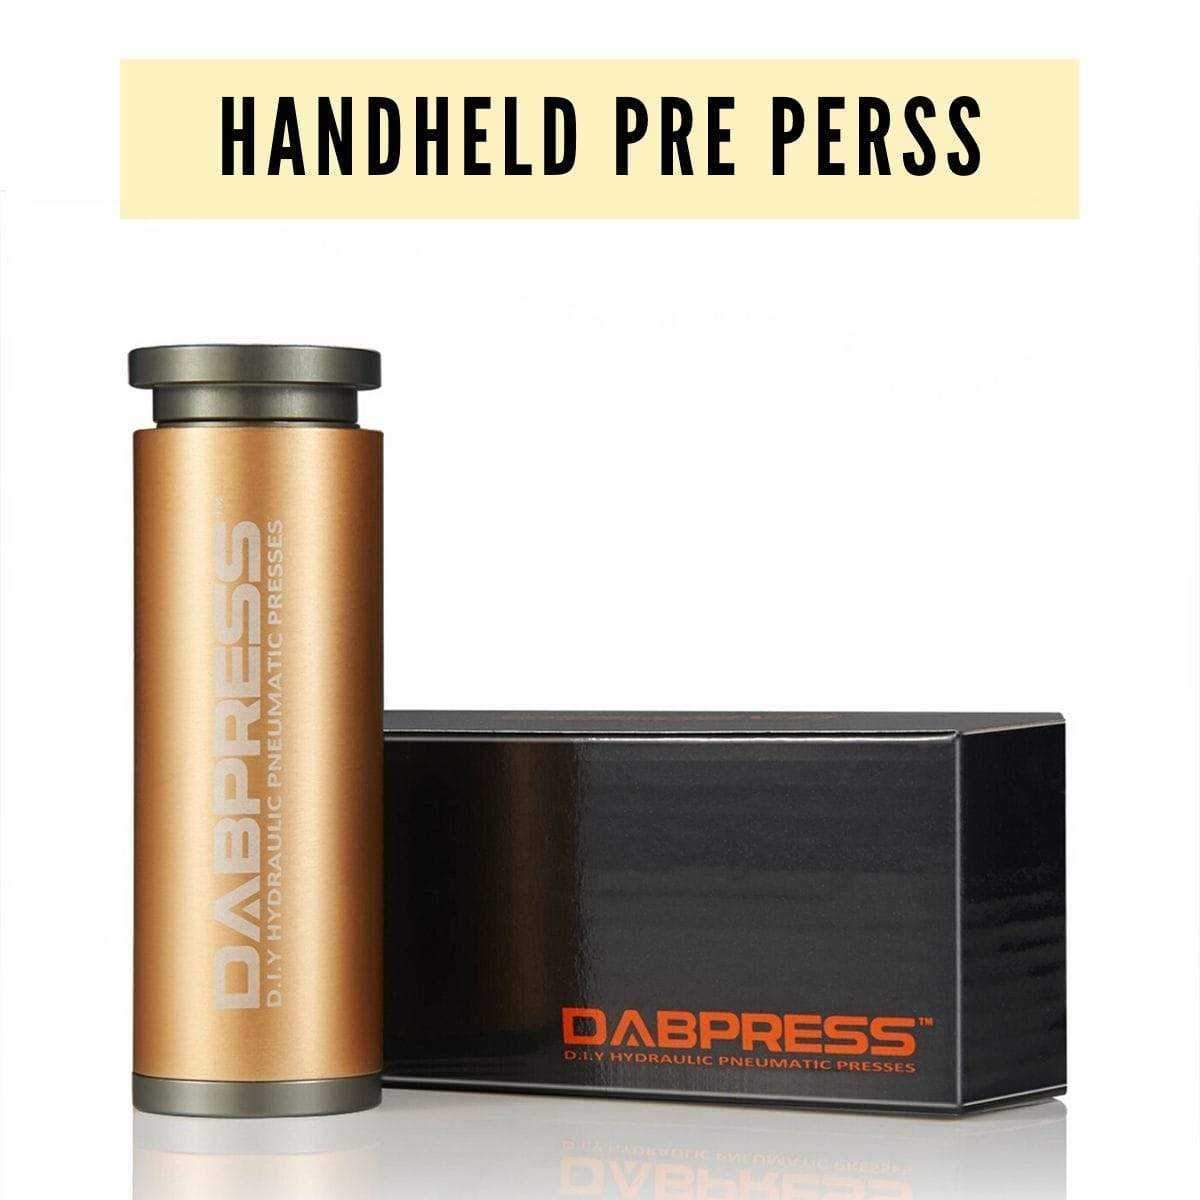 Handheld Pre Press Mold ( Flower Puck ) - Bottle Tech Styled Cylinder Mold Works Well with 2x4 Filters | Dabpress